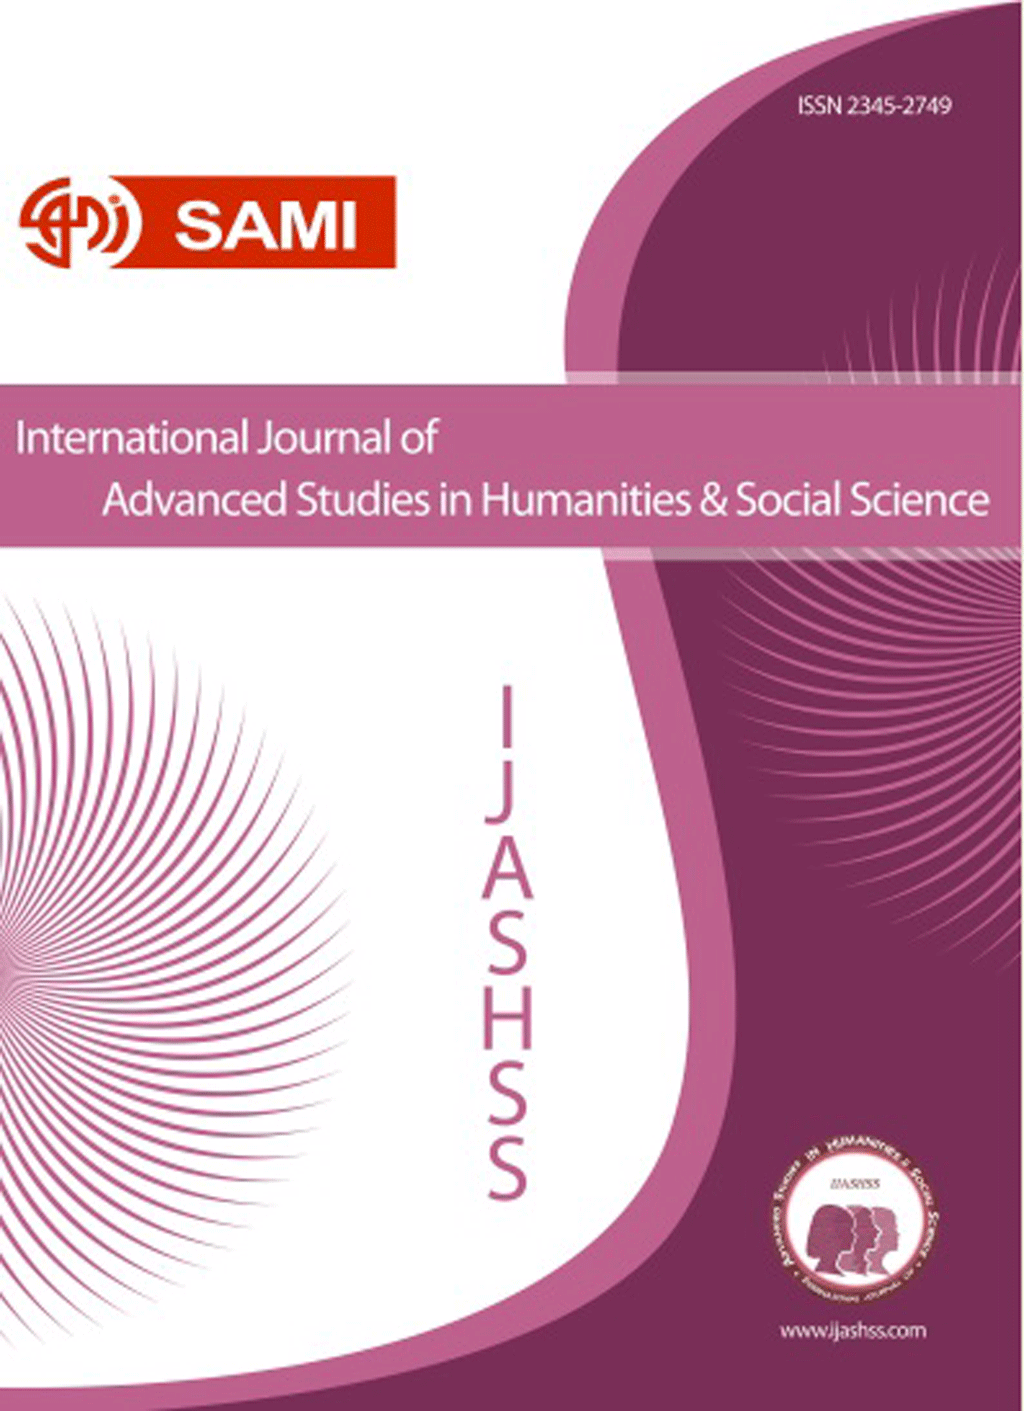 International Journal of Advanced Studies in Humanities and Social Science - July 2013, Volume 2 - Issue 3